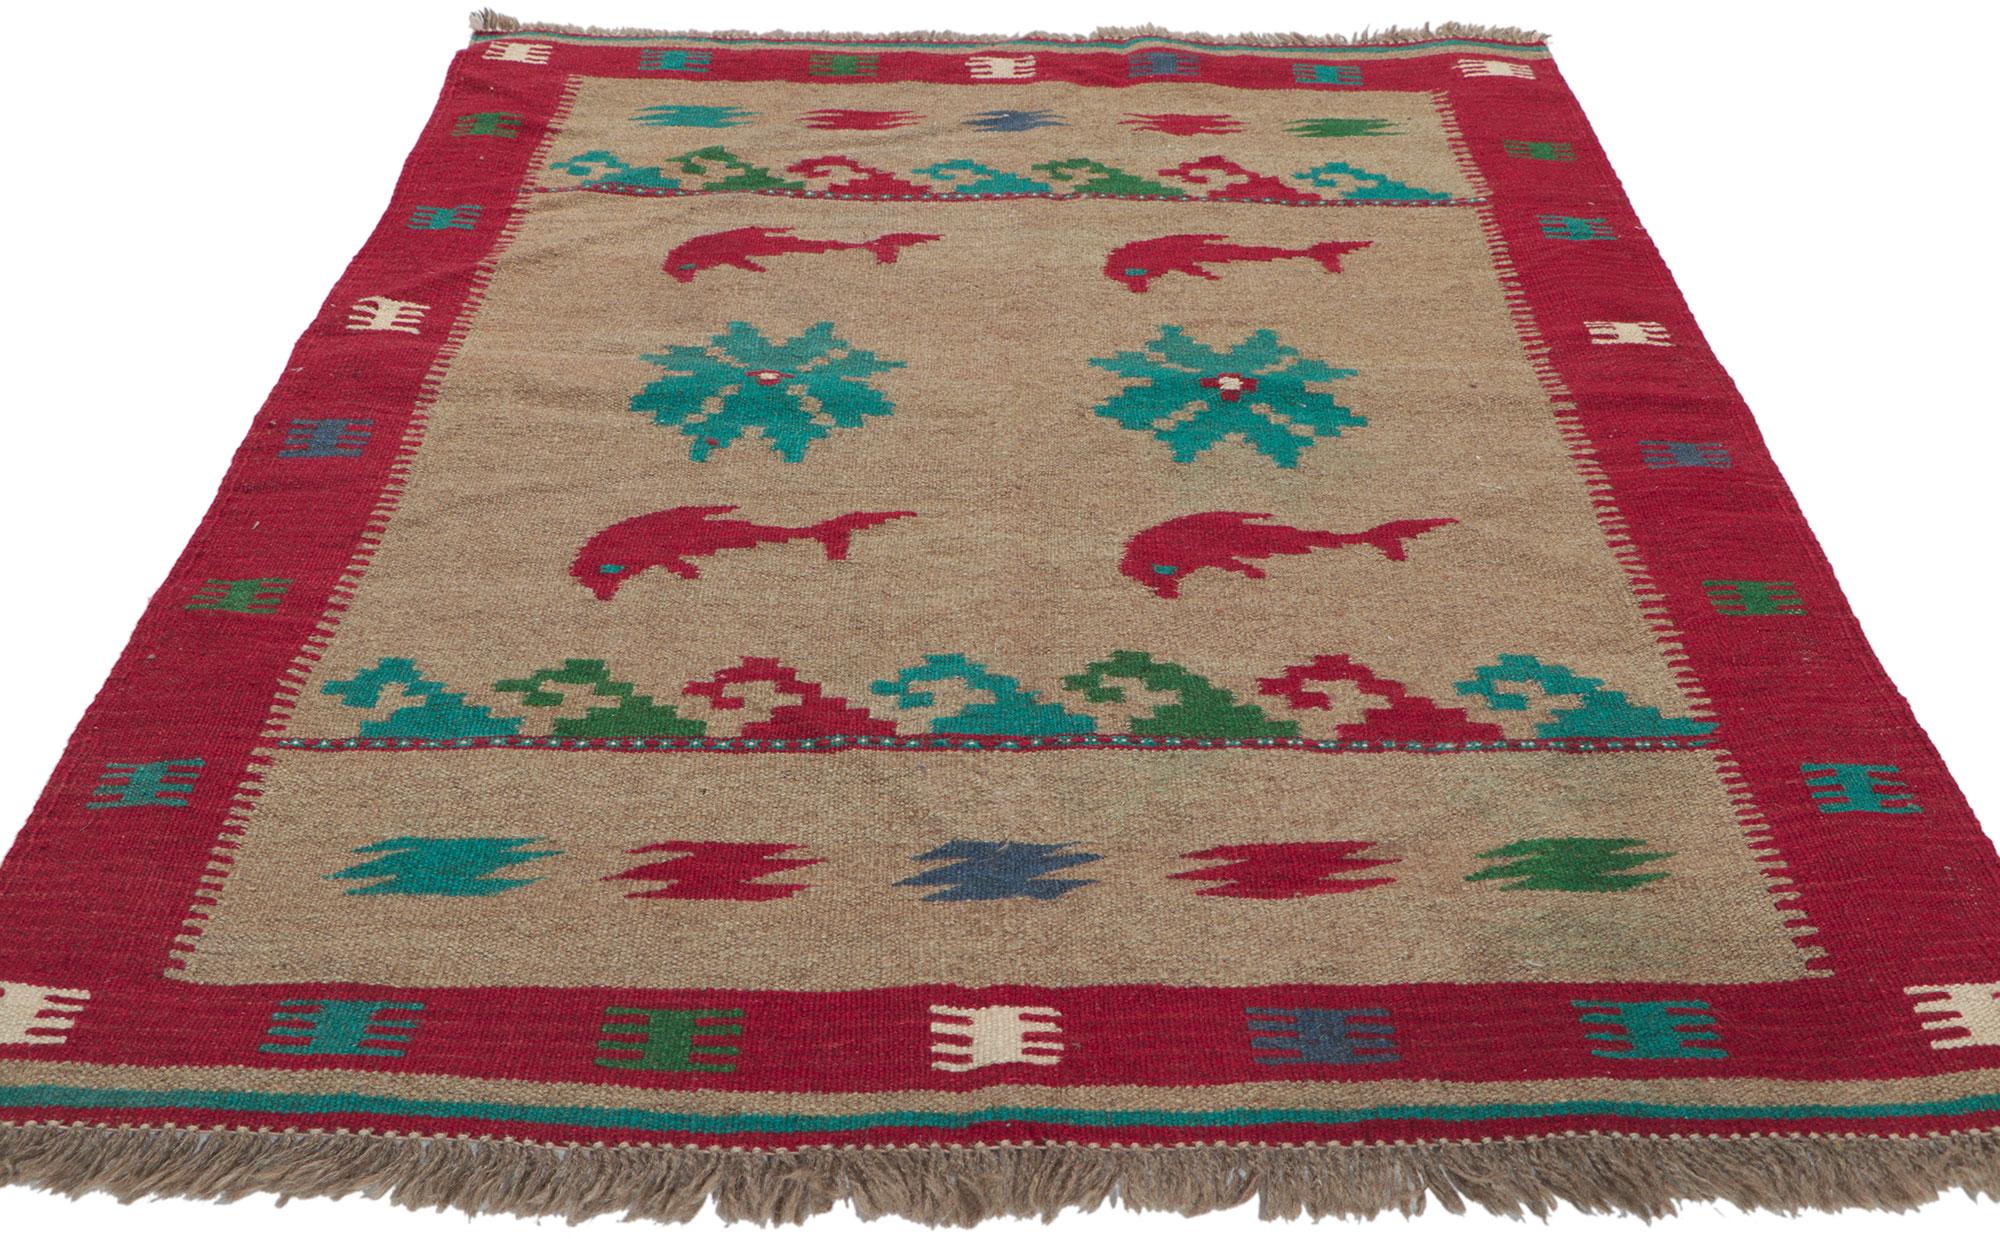 Hand-Woven Vintage Persian Shiraz Kilim Rug with Dolphins For Sale